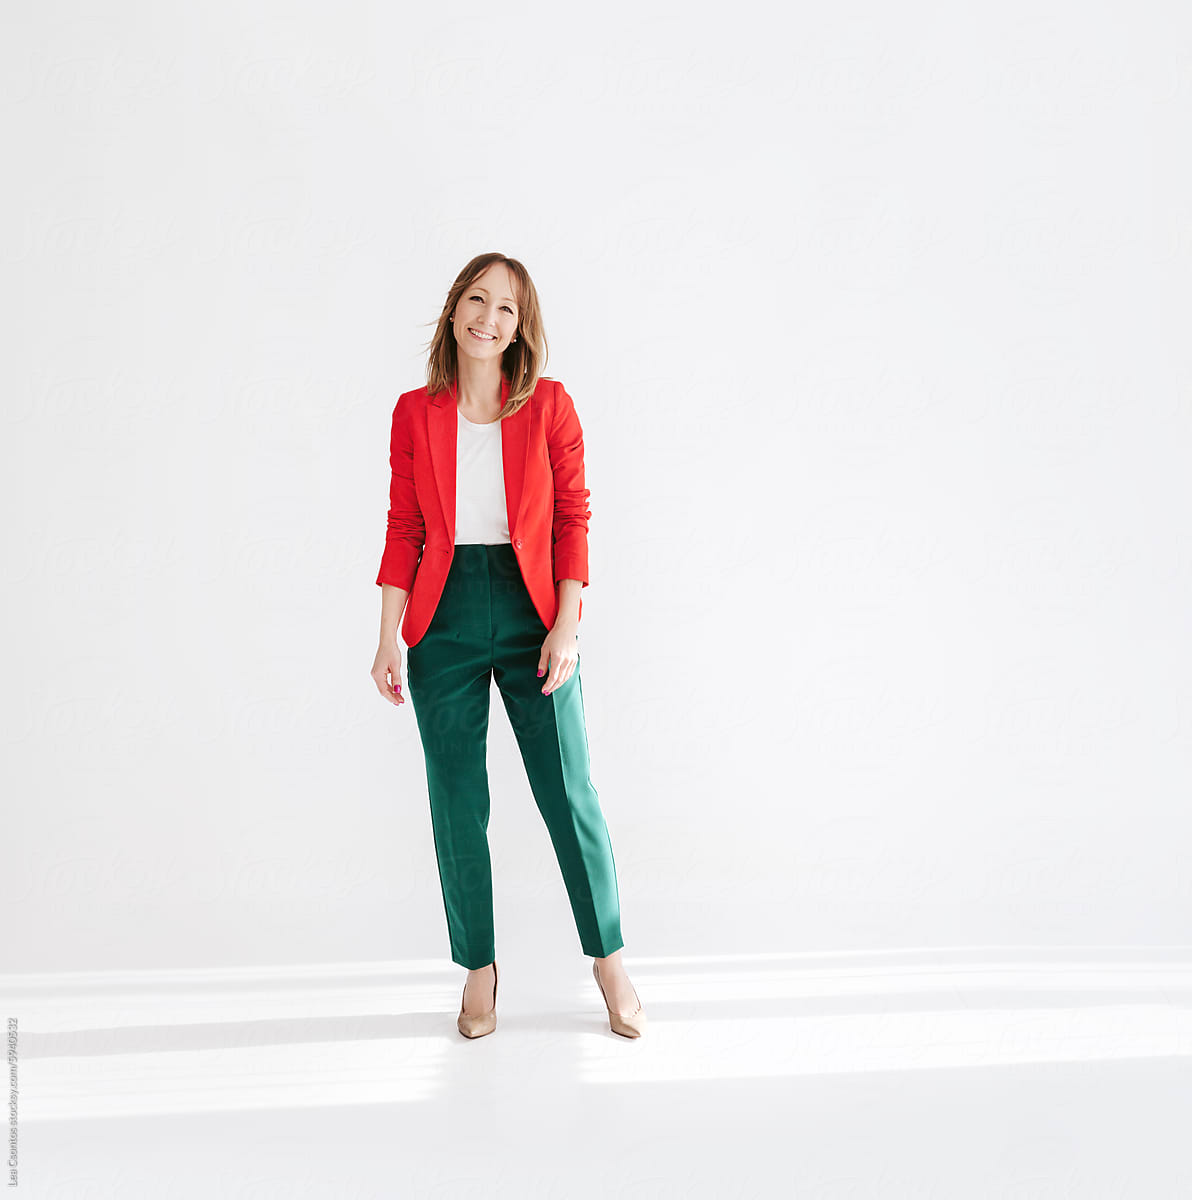 Portrait of a fashionable and confident woman wearing bold colors.